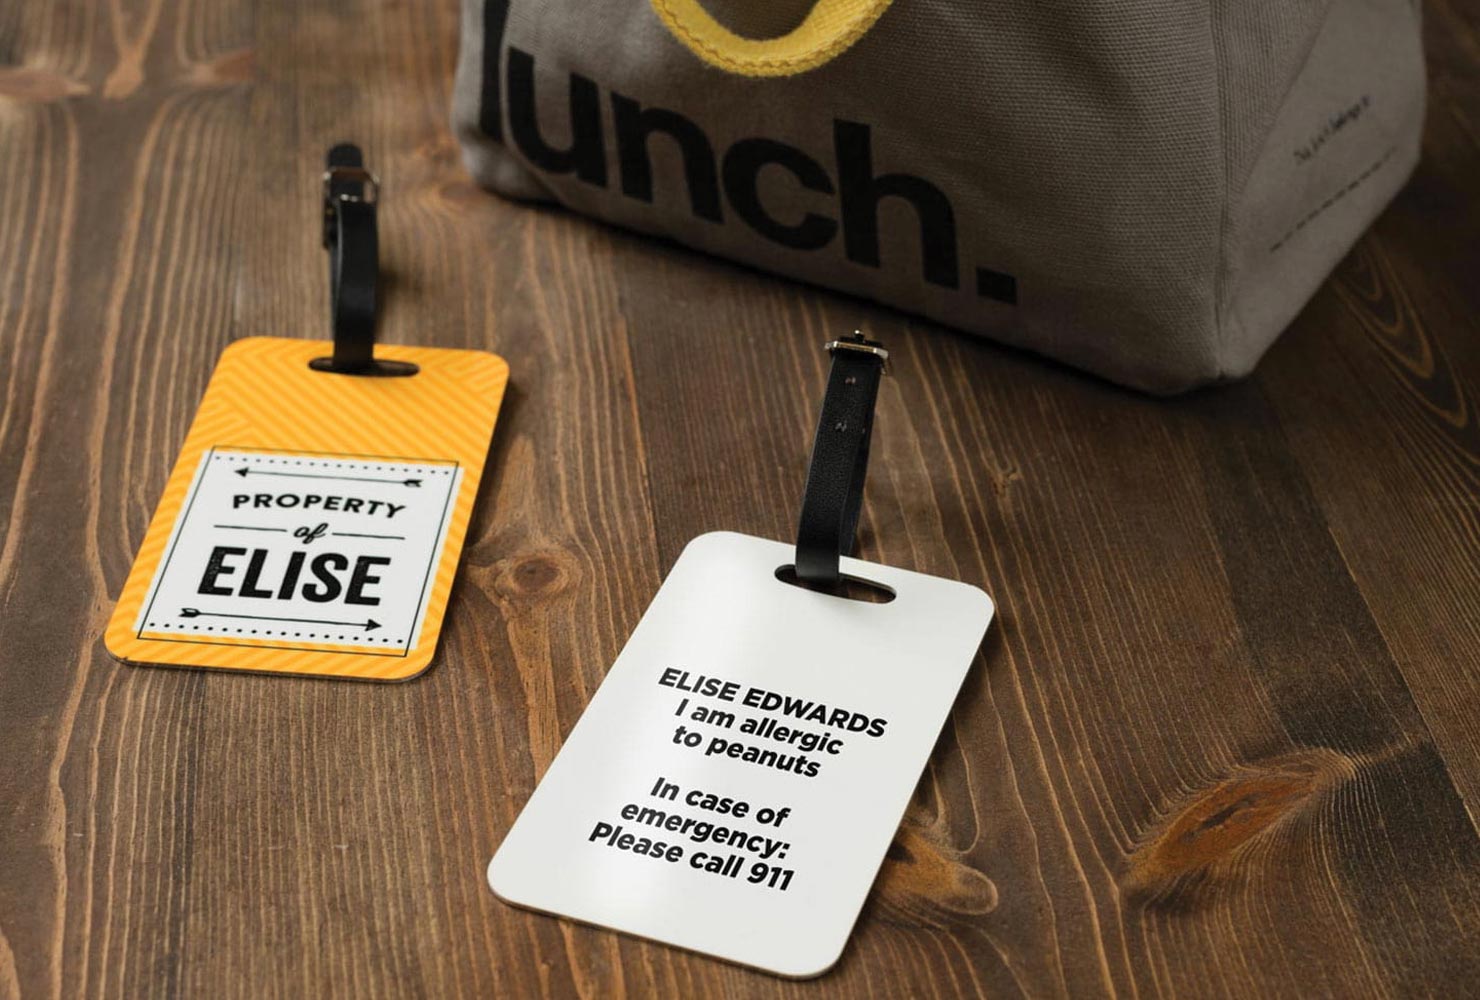 Travel tags.